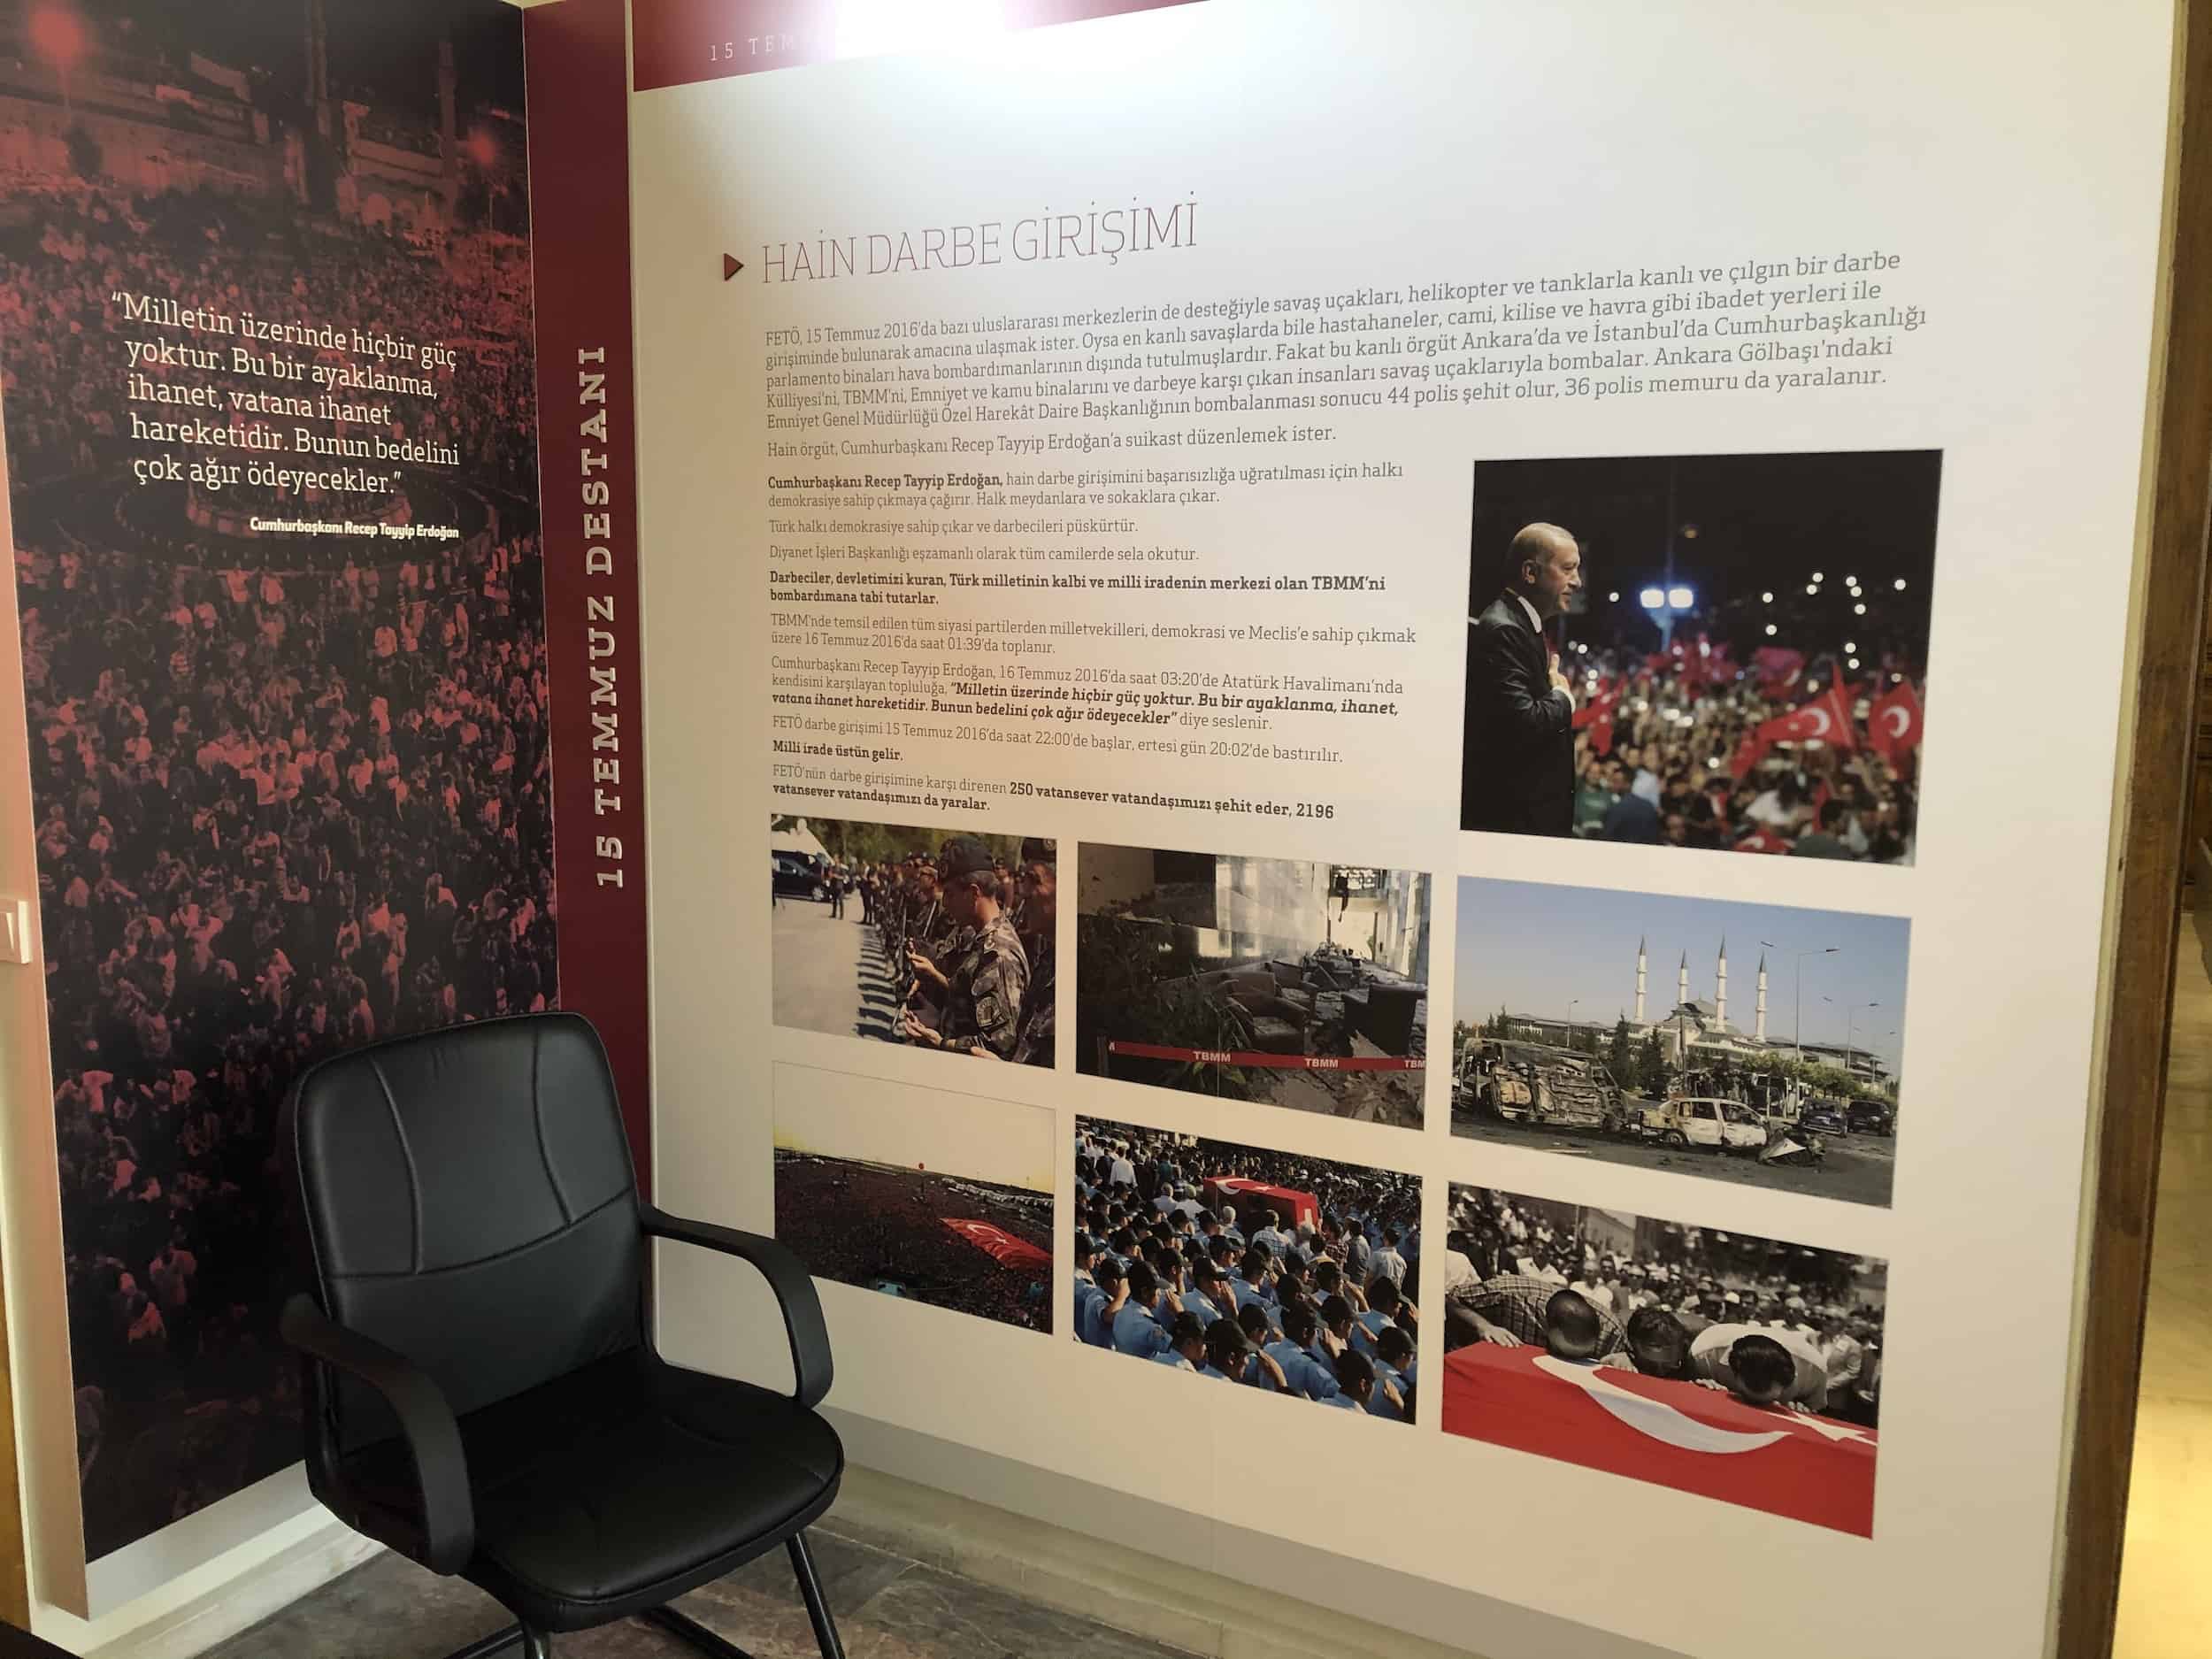 Information about the 2016 coup attempt at the Anadolu University Republic History Museu